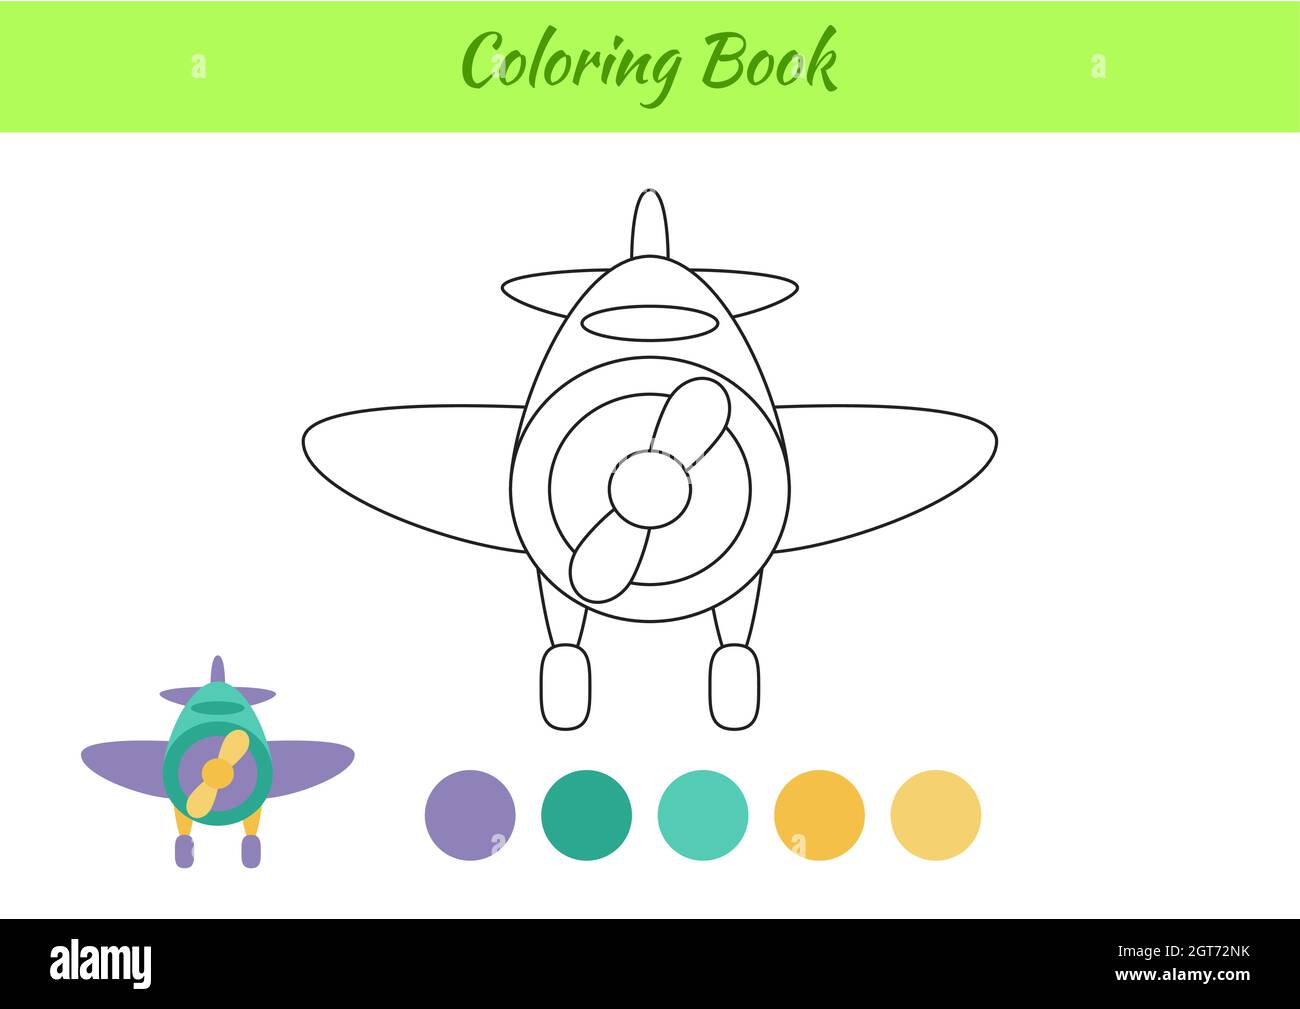 Coloring book airplane for children. Educational activity page for ...